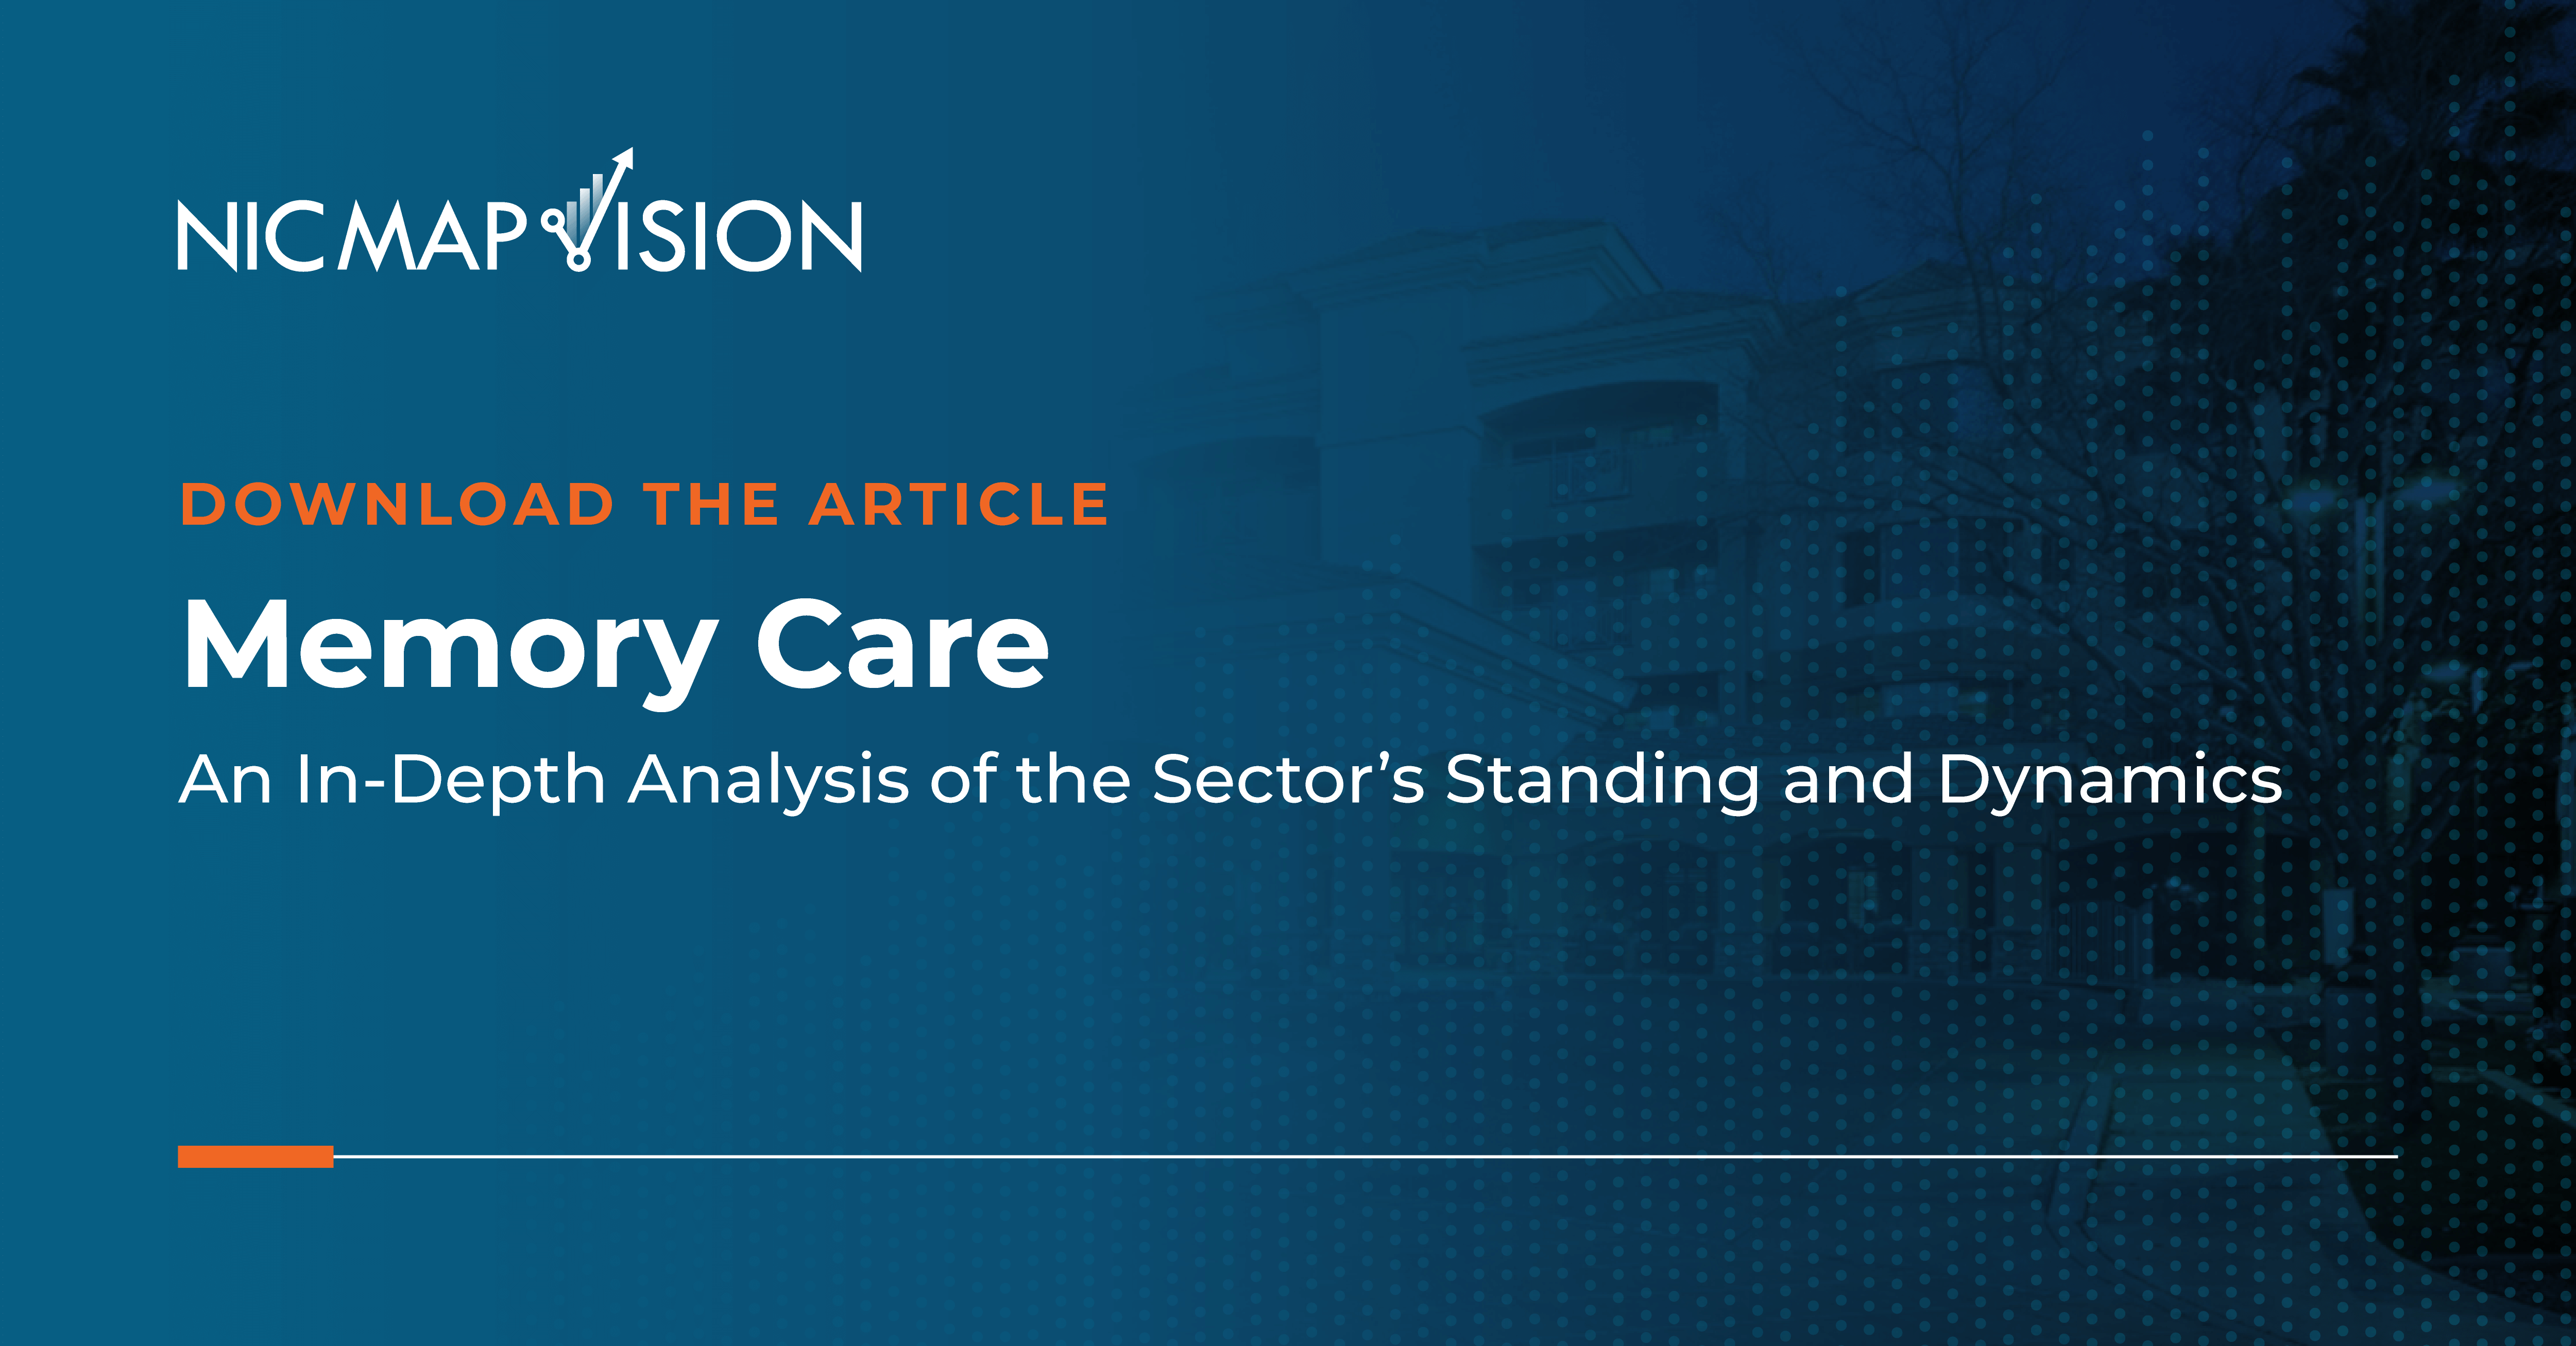 Memory Care — An In-Depth Analysis of the Sector’s Standing and Dynamics